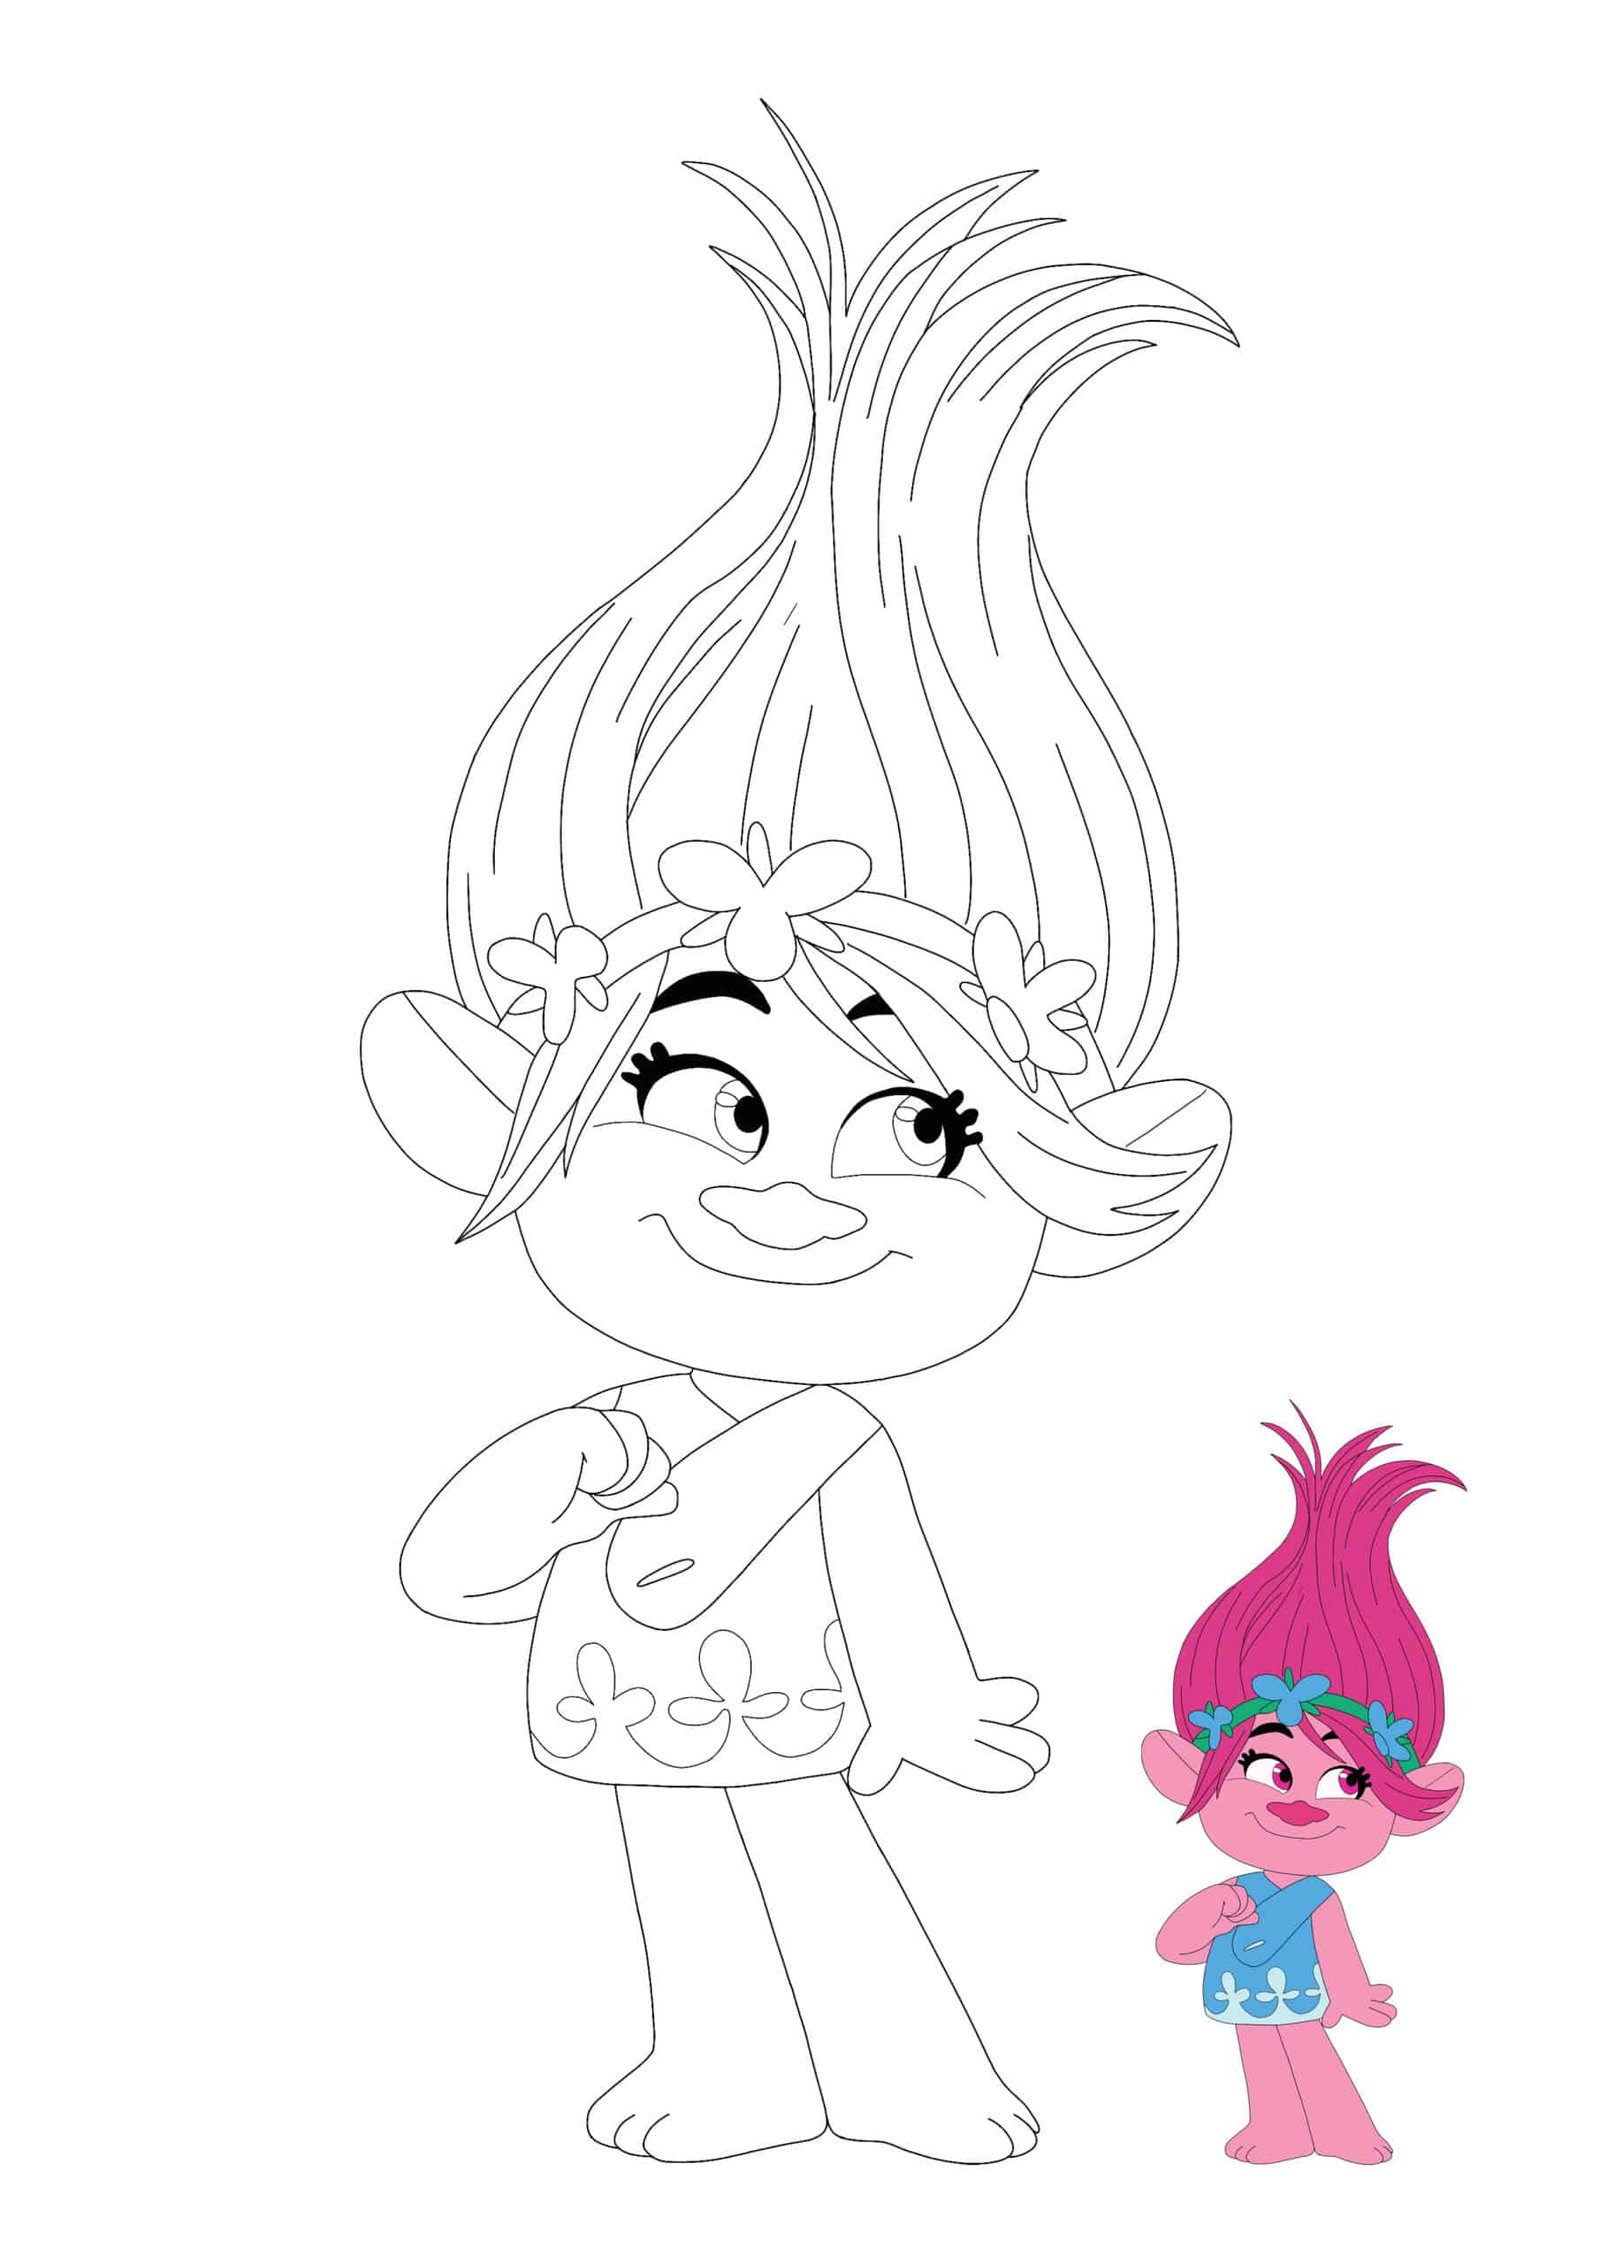 Princess poppy from trolls coloring pages